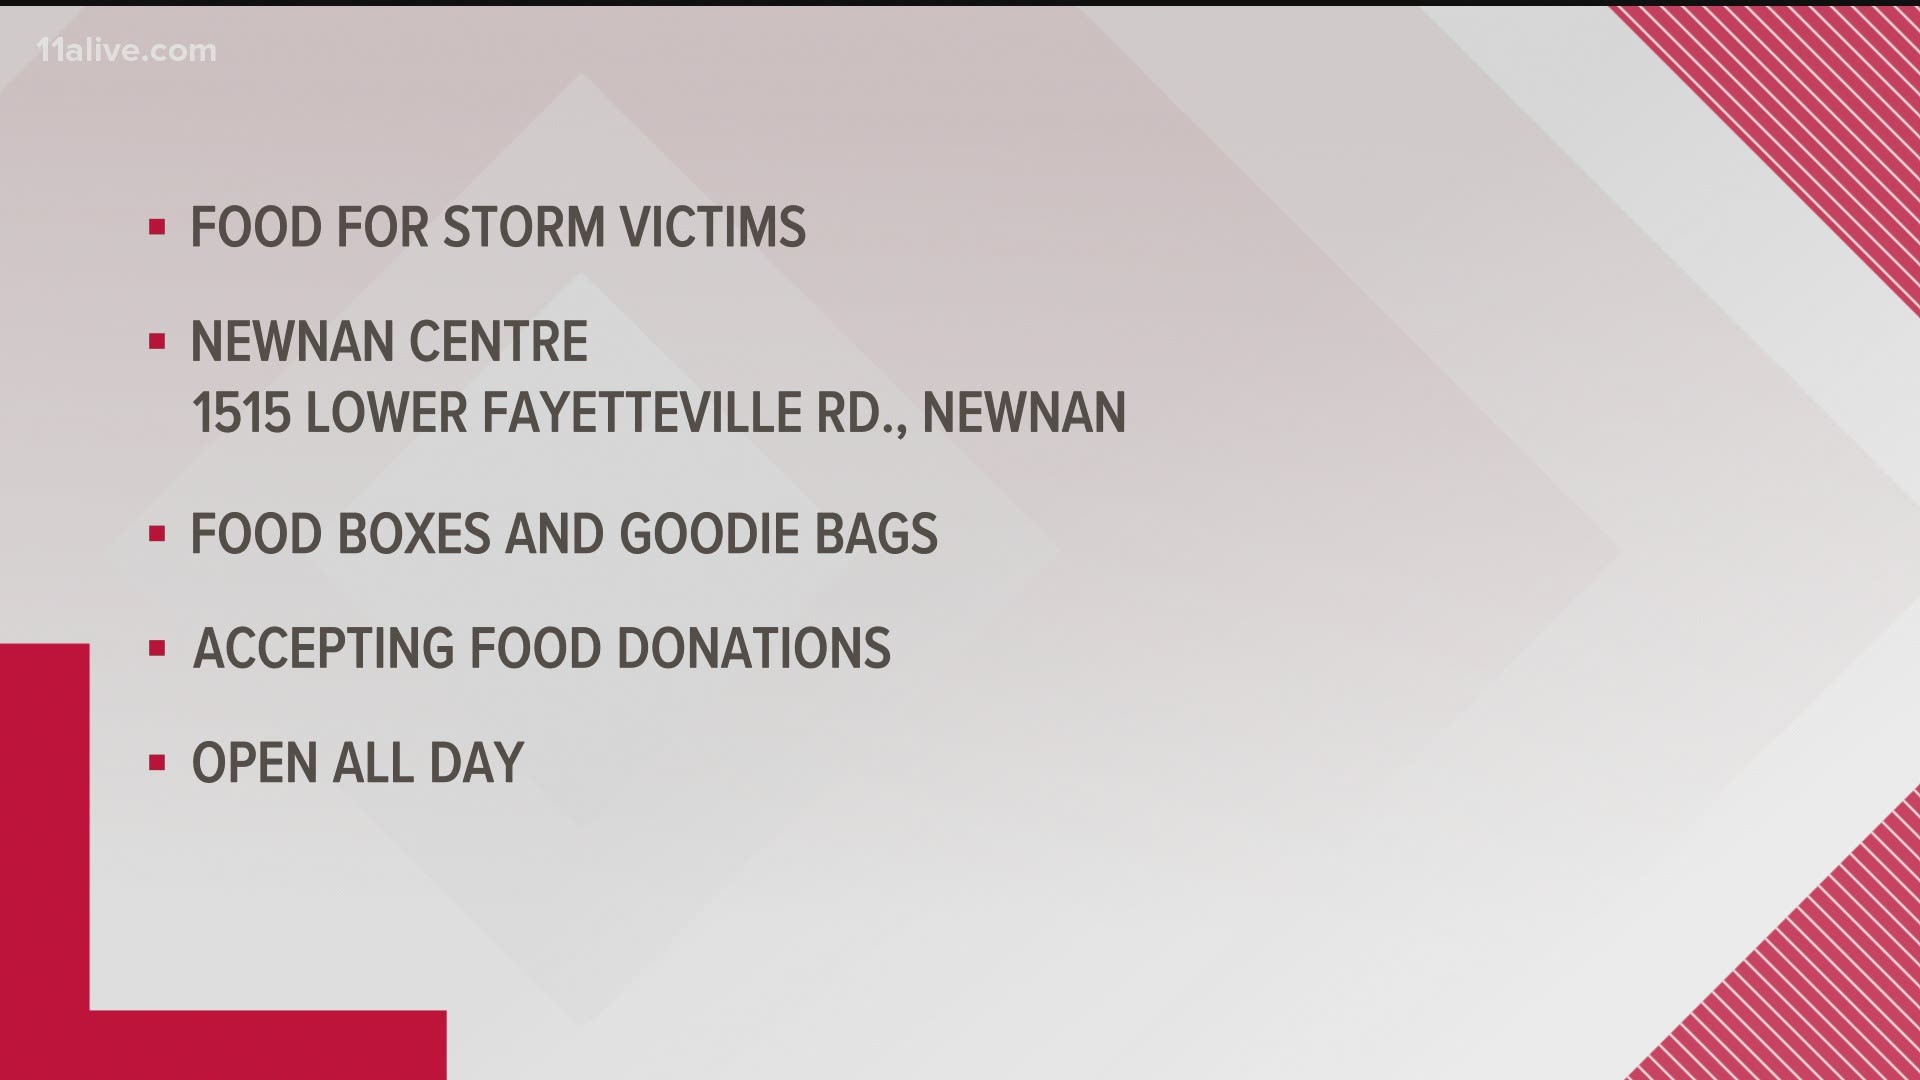 Newnan Police Department is opening a donation site at the Newnan Center to help storm victims with water and toiletries.